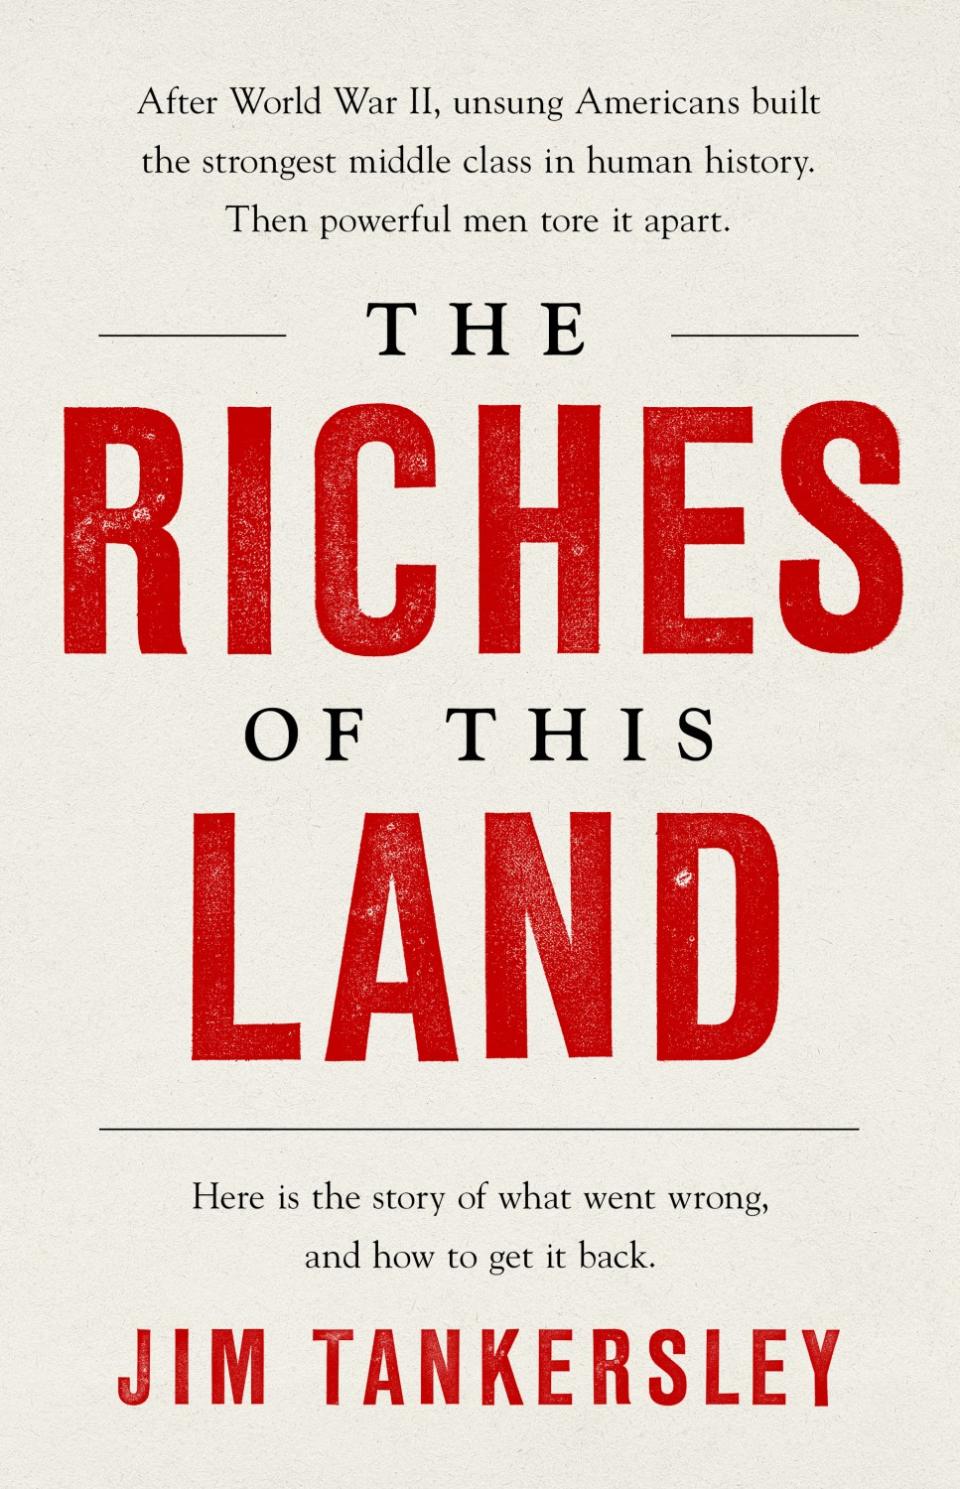 Book jacket for "The Riches of This Land" by Jim Tankersley